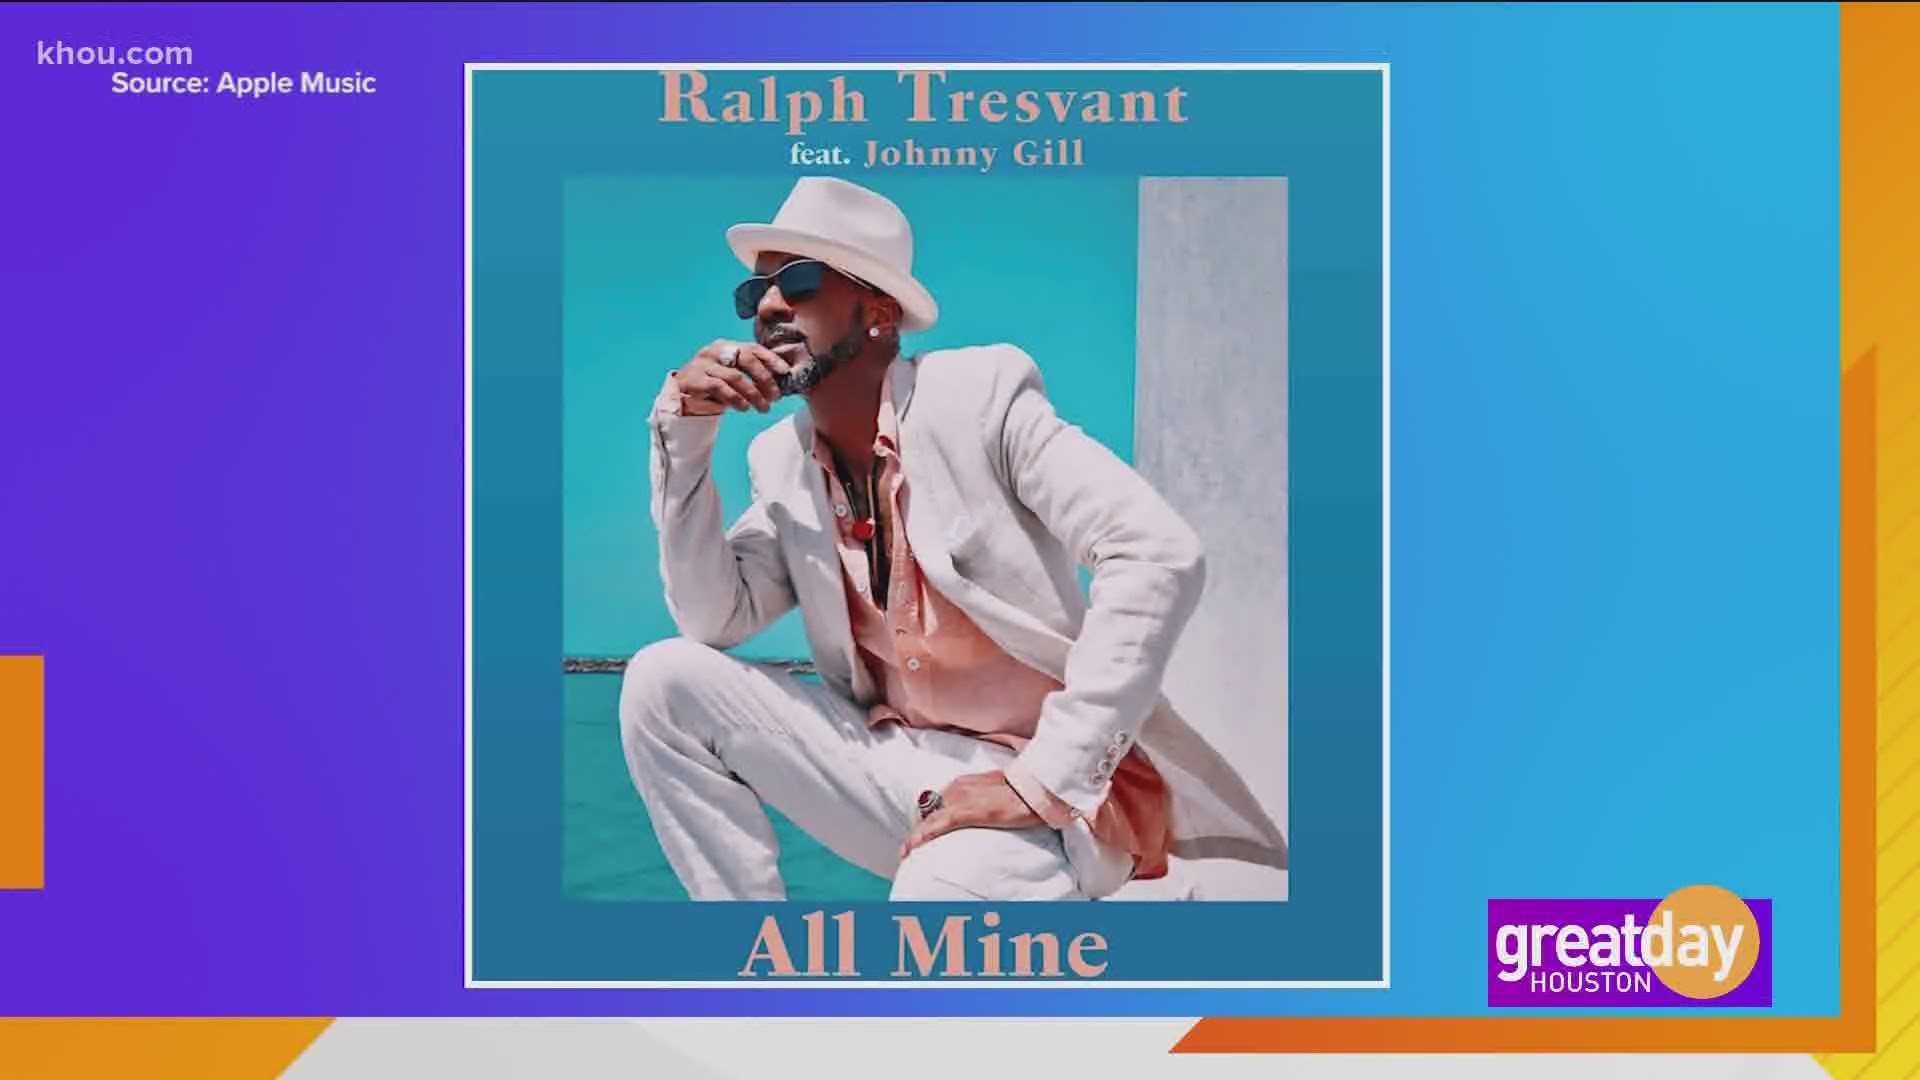 R&B artist Ralph Tresvant talks to Deborah Duncan about his successful career as New Edition's leading man and his latest single "All Mine" featuring Johnny Gill